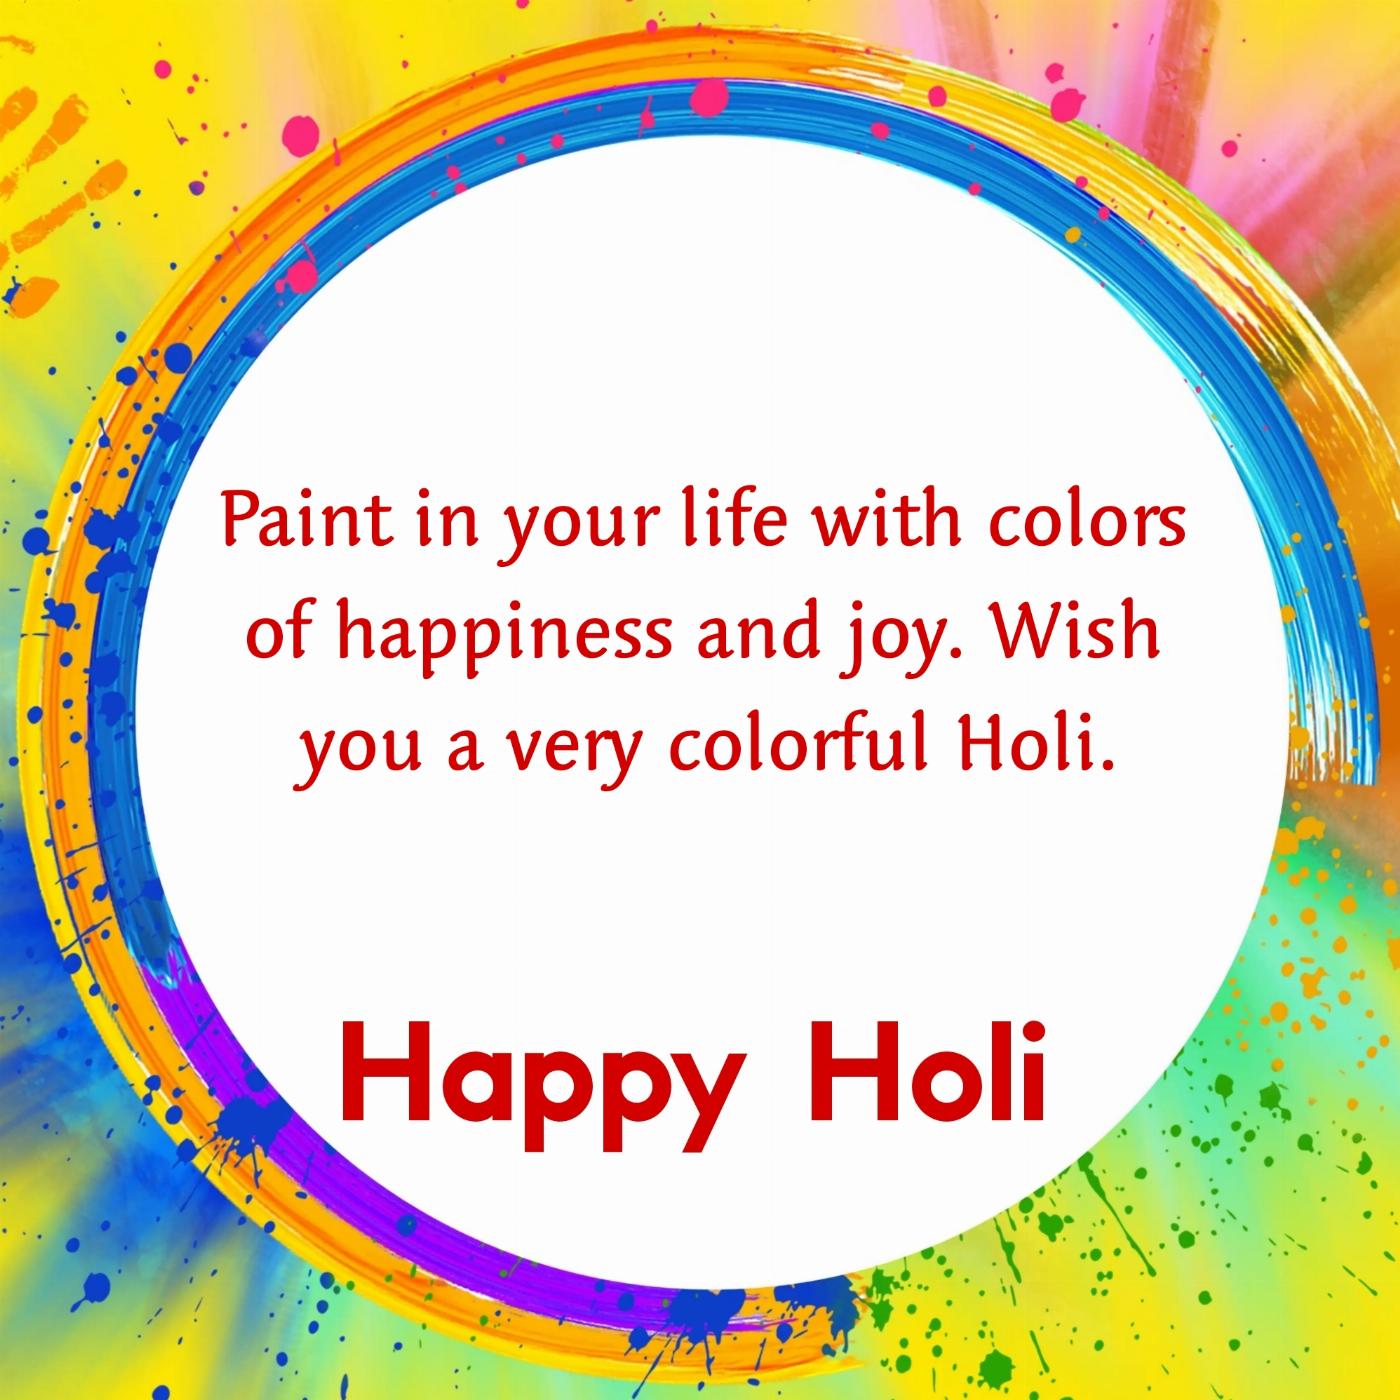 Paint in your life with colors of happiness and joy Wish you a very colorful Holi